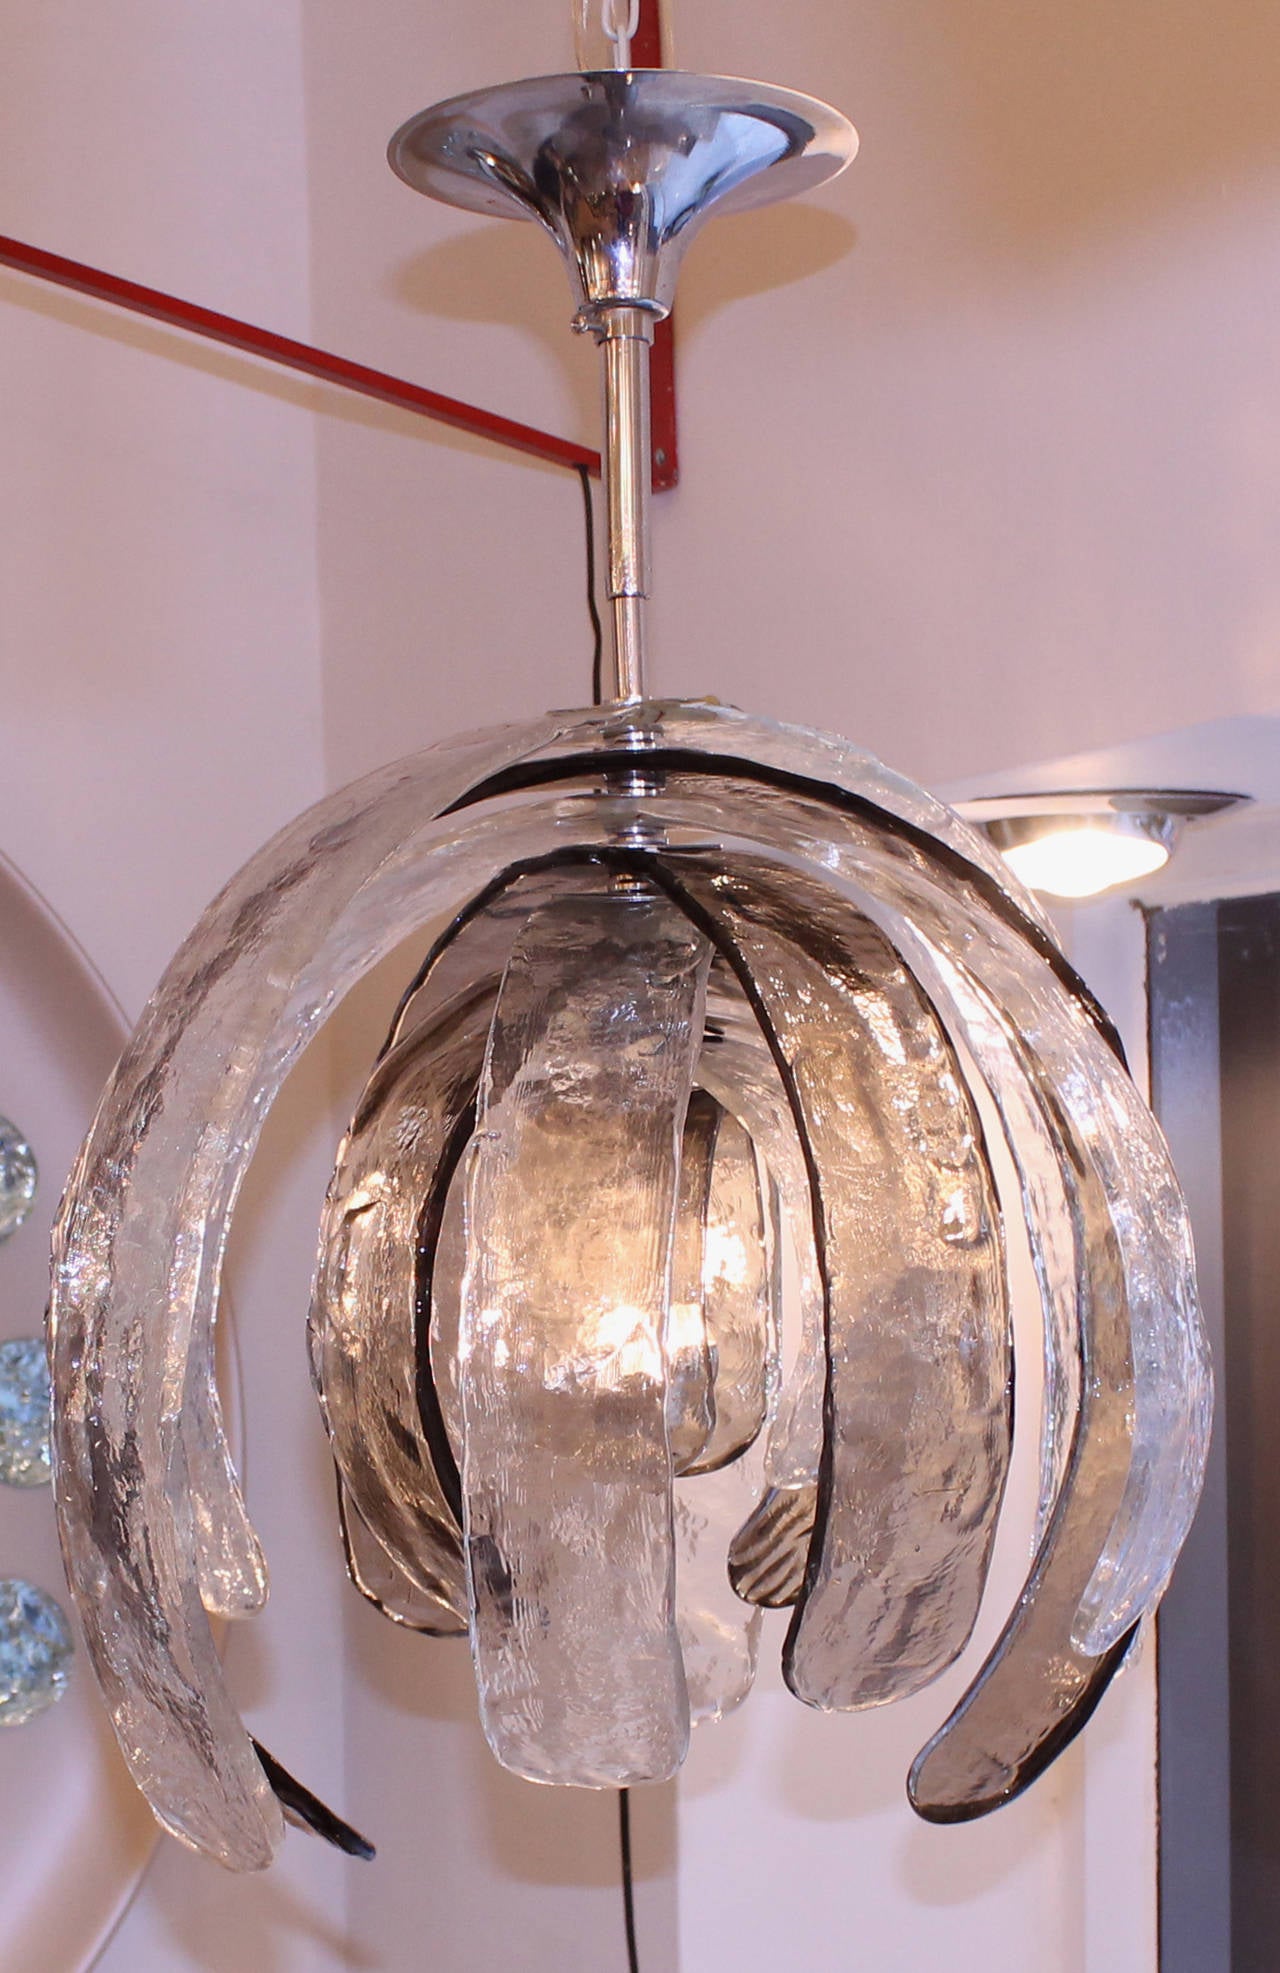 This pendant is one of the most striking designs by Nason for Mazzega. It is made with nine semi-circular handblown glasses of different sizes, alternating clear, rich texture glasses with gray ones. It holds one 100W regular light socket.
Mazzega